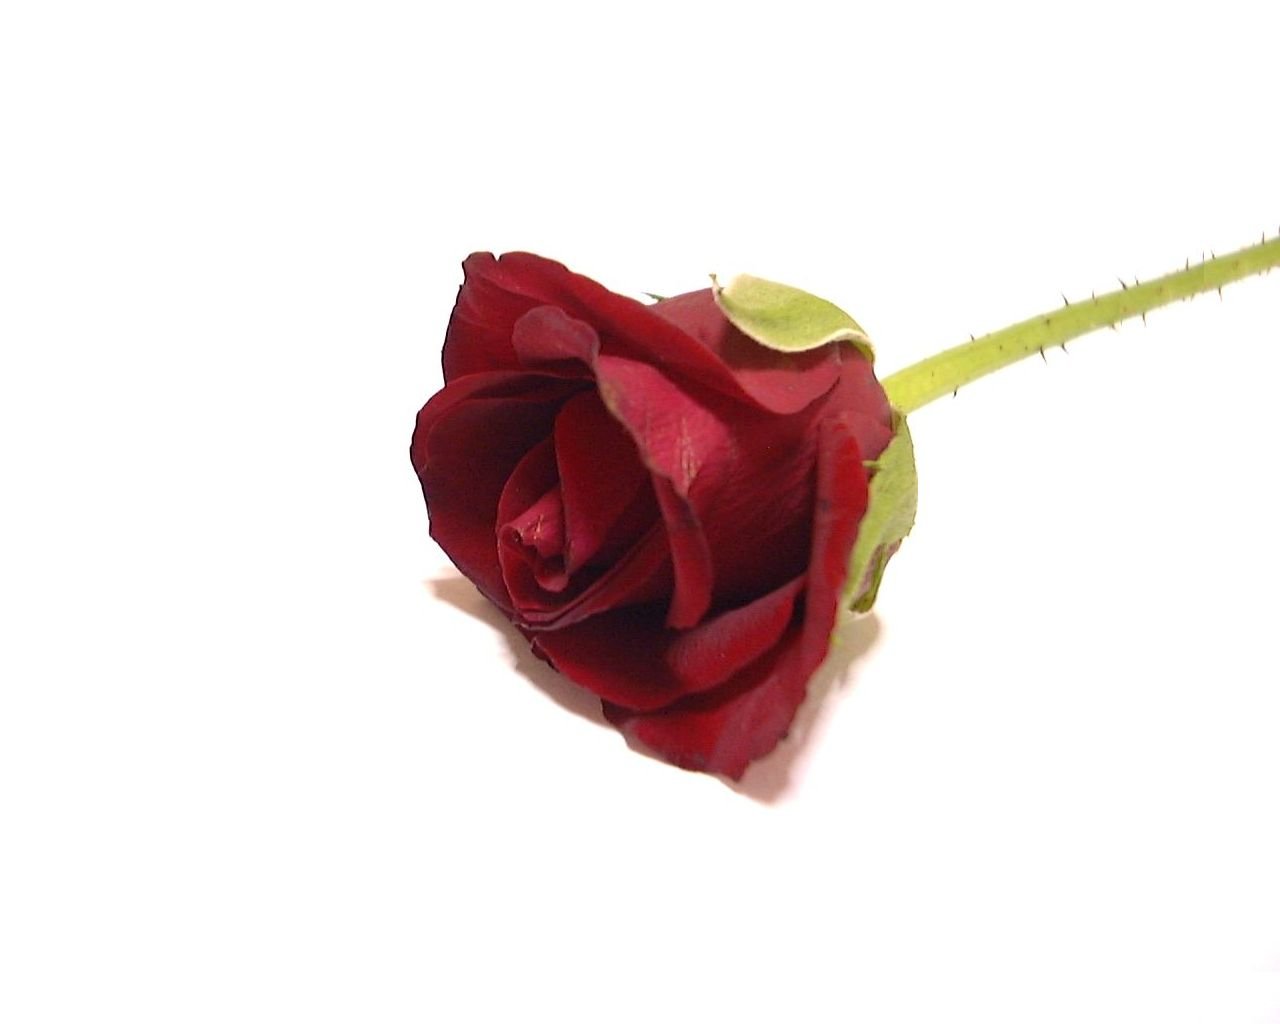 a single rose on a white surface